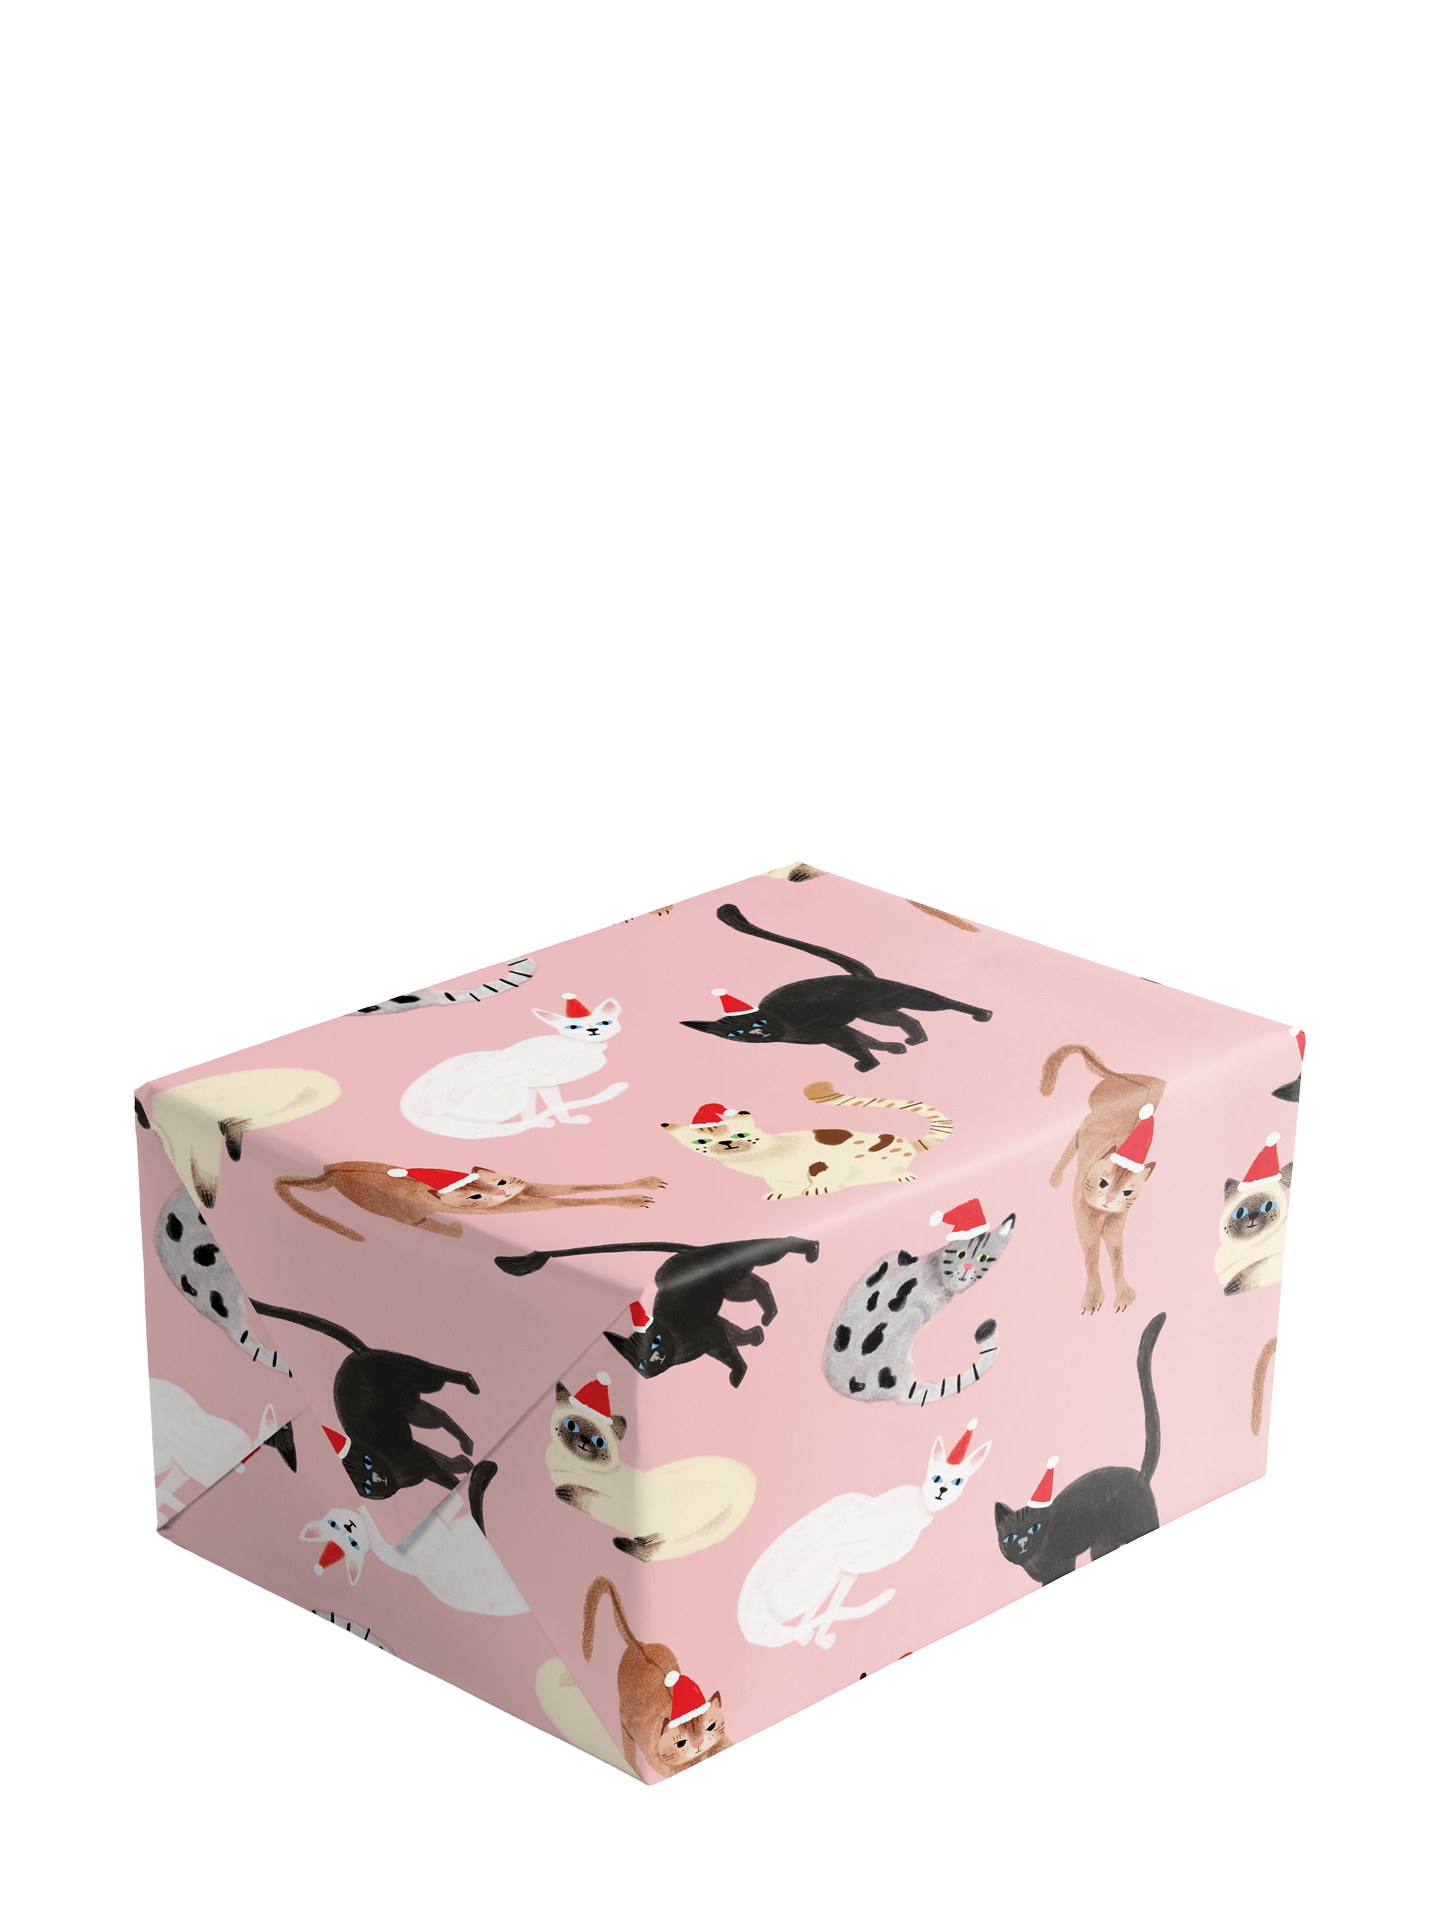 Feline Christmas, 3 x Sheets on a Roll - Christmas wrapping paper